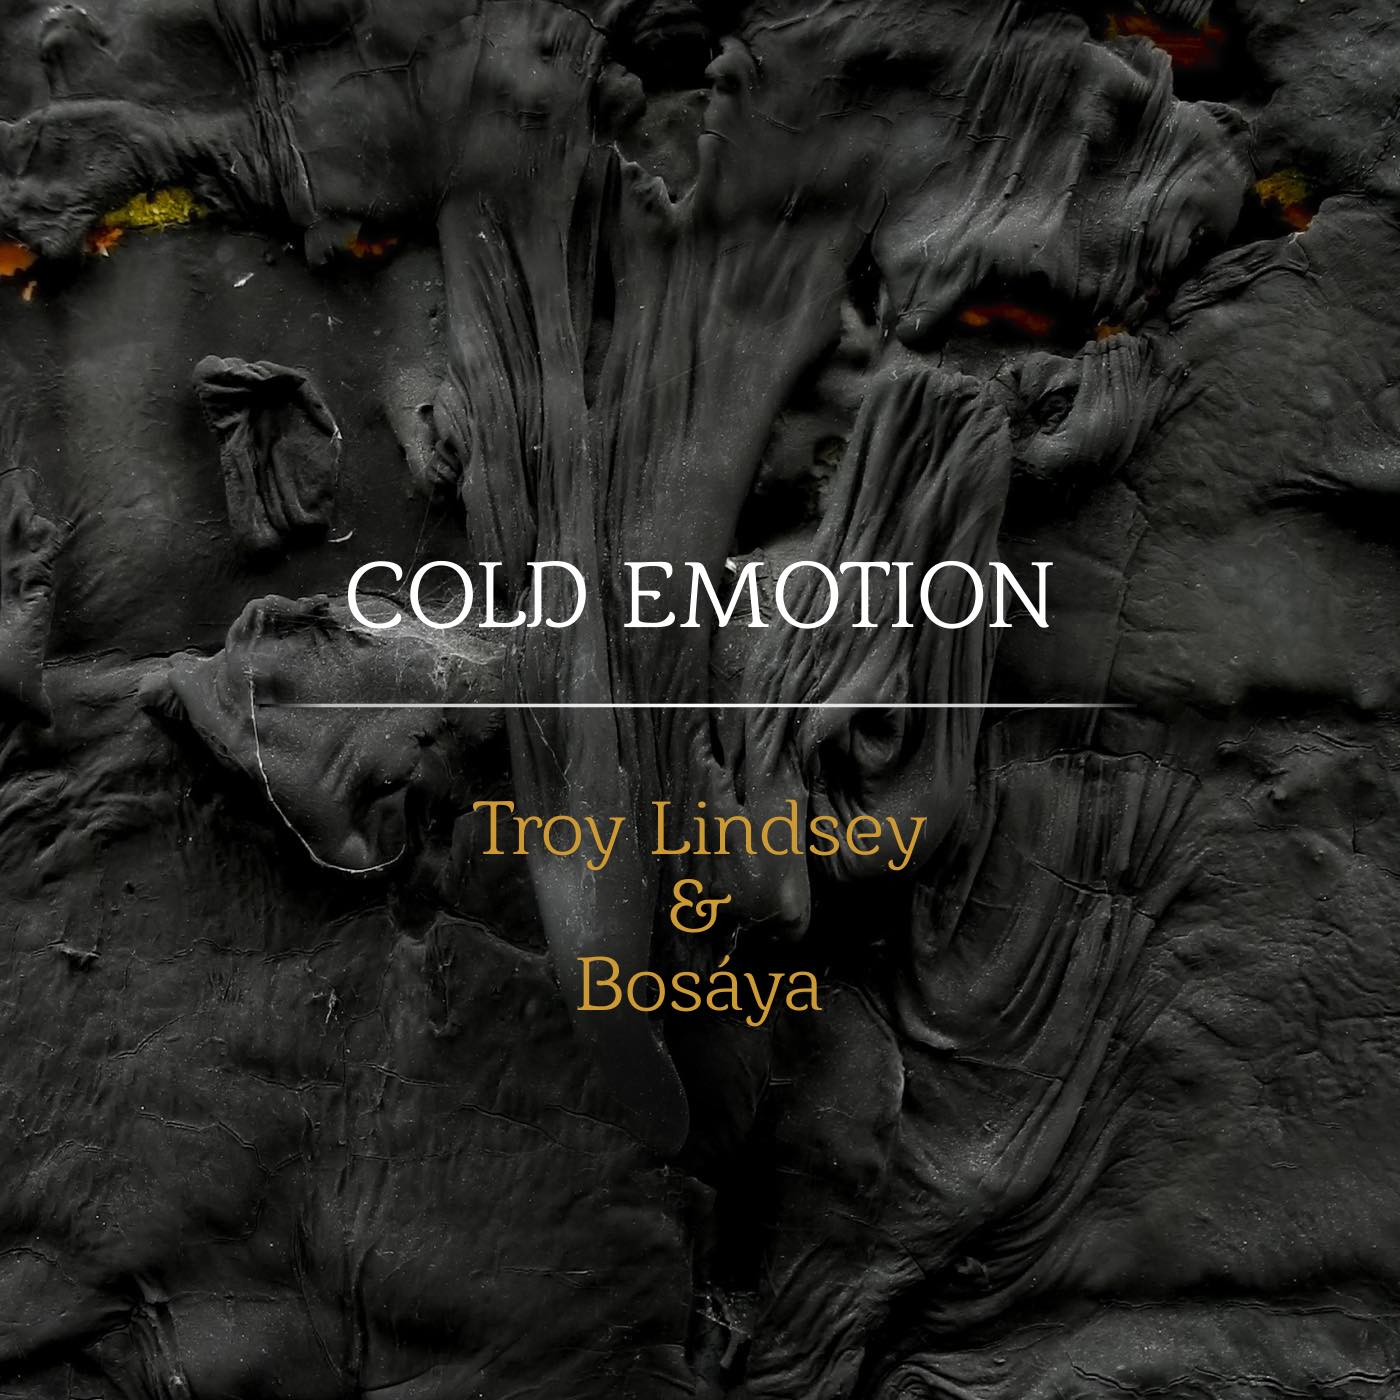  Troy Lindsey – “It’s Not Your Fault”